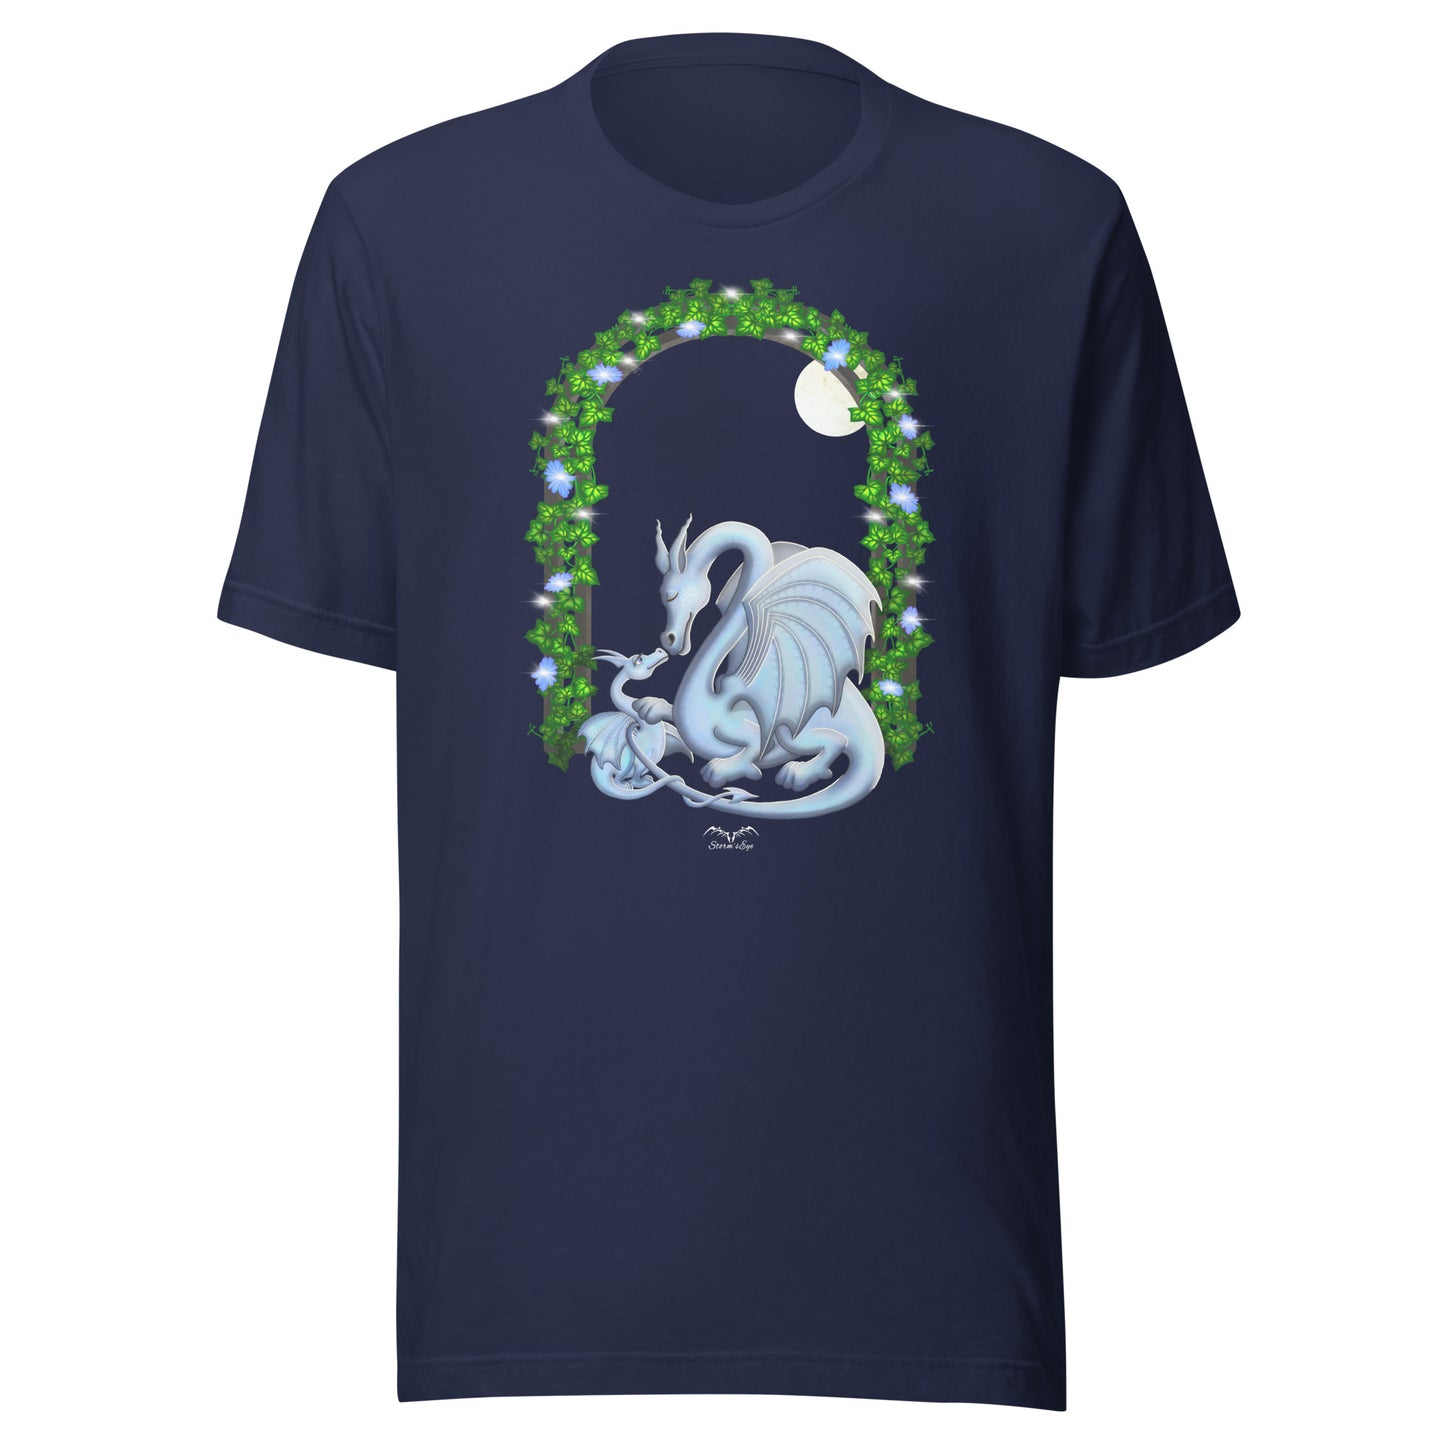 Mum and baby dragon T-shirt, navy blue, by Stormseye Design